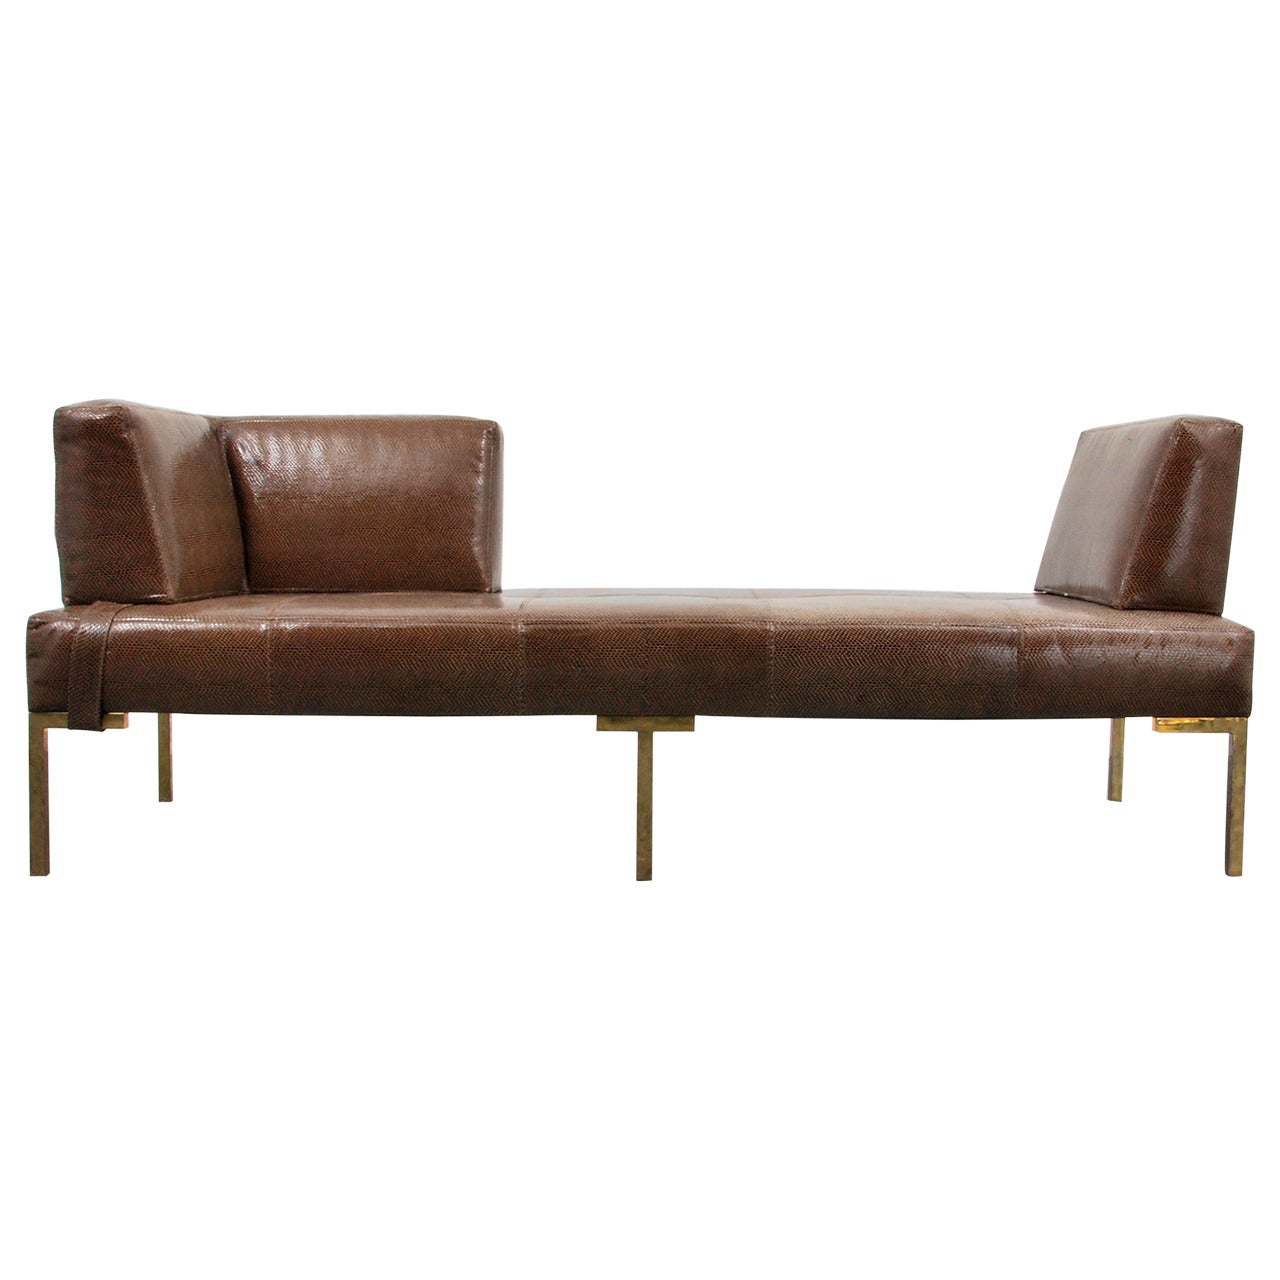 Luigi Gentile Leather Daybeds or Chaise Lounges, Two Available